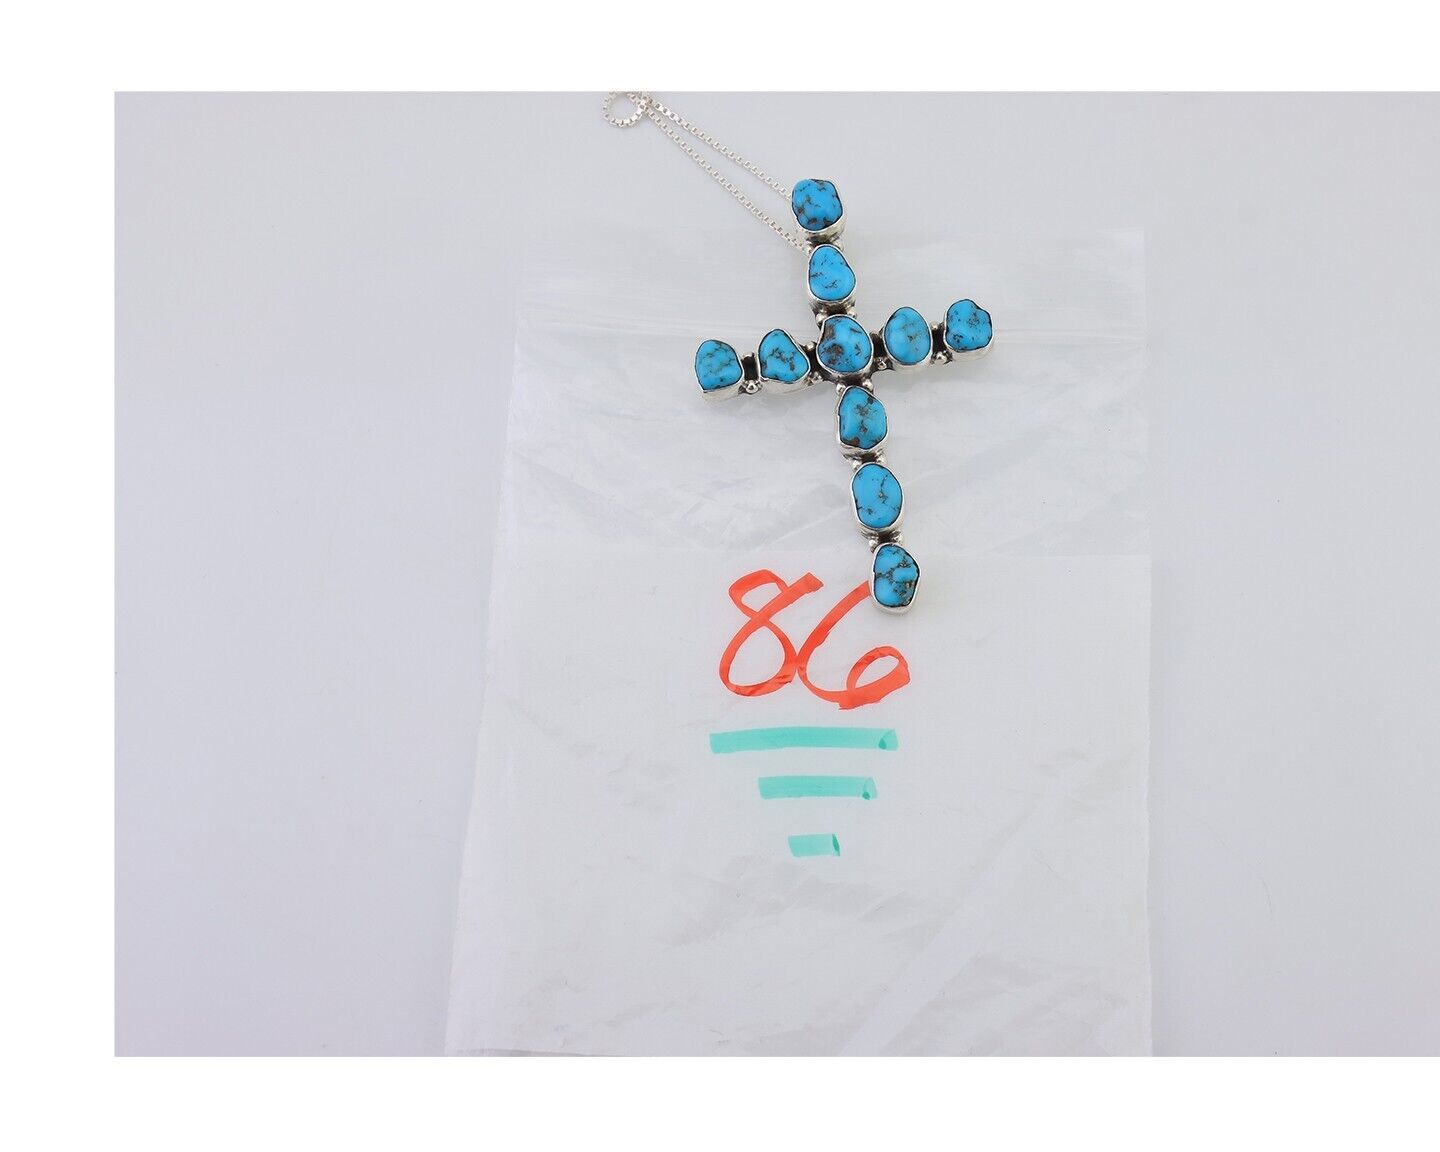 Navajo Cross Necklace 925 Silver Blue Turquoise Signed Native American C.80's